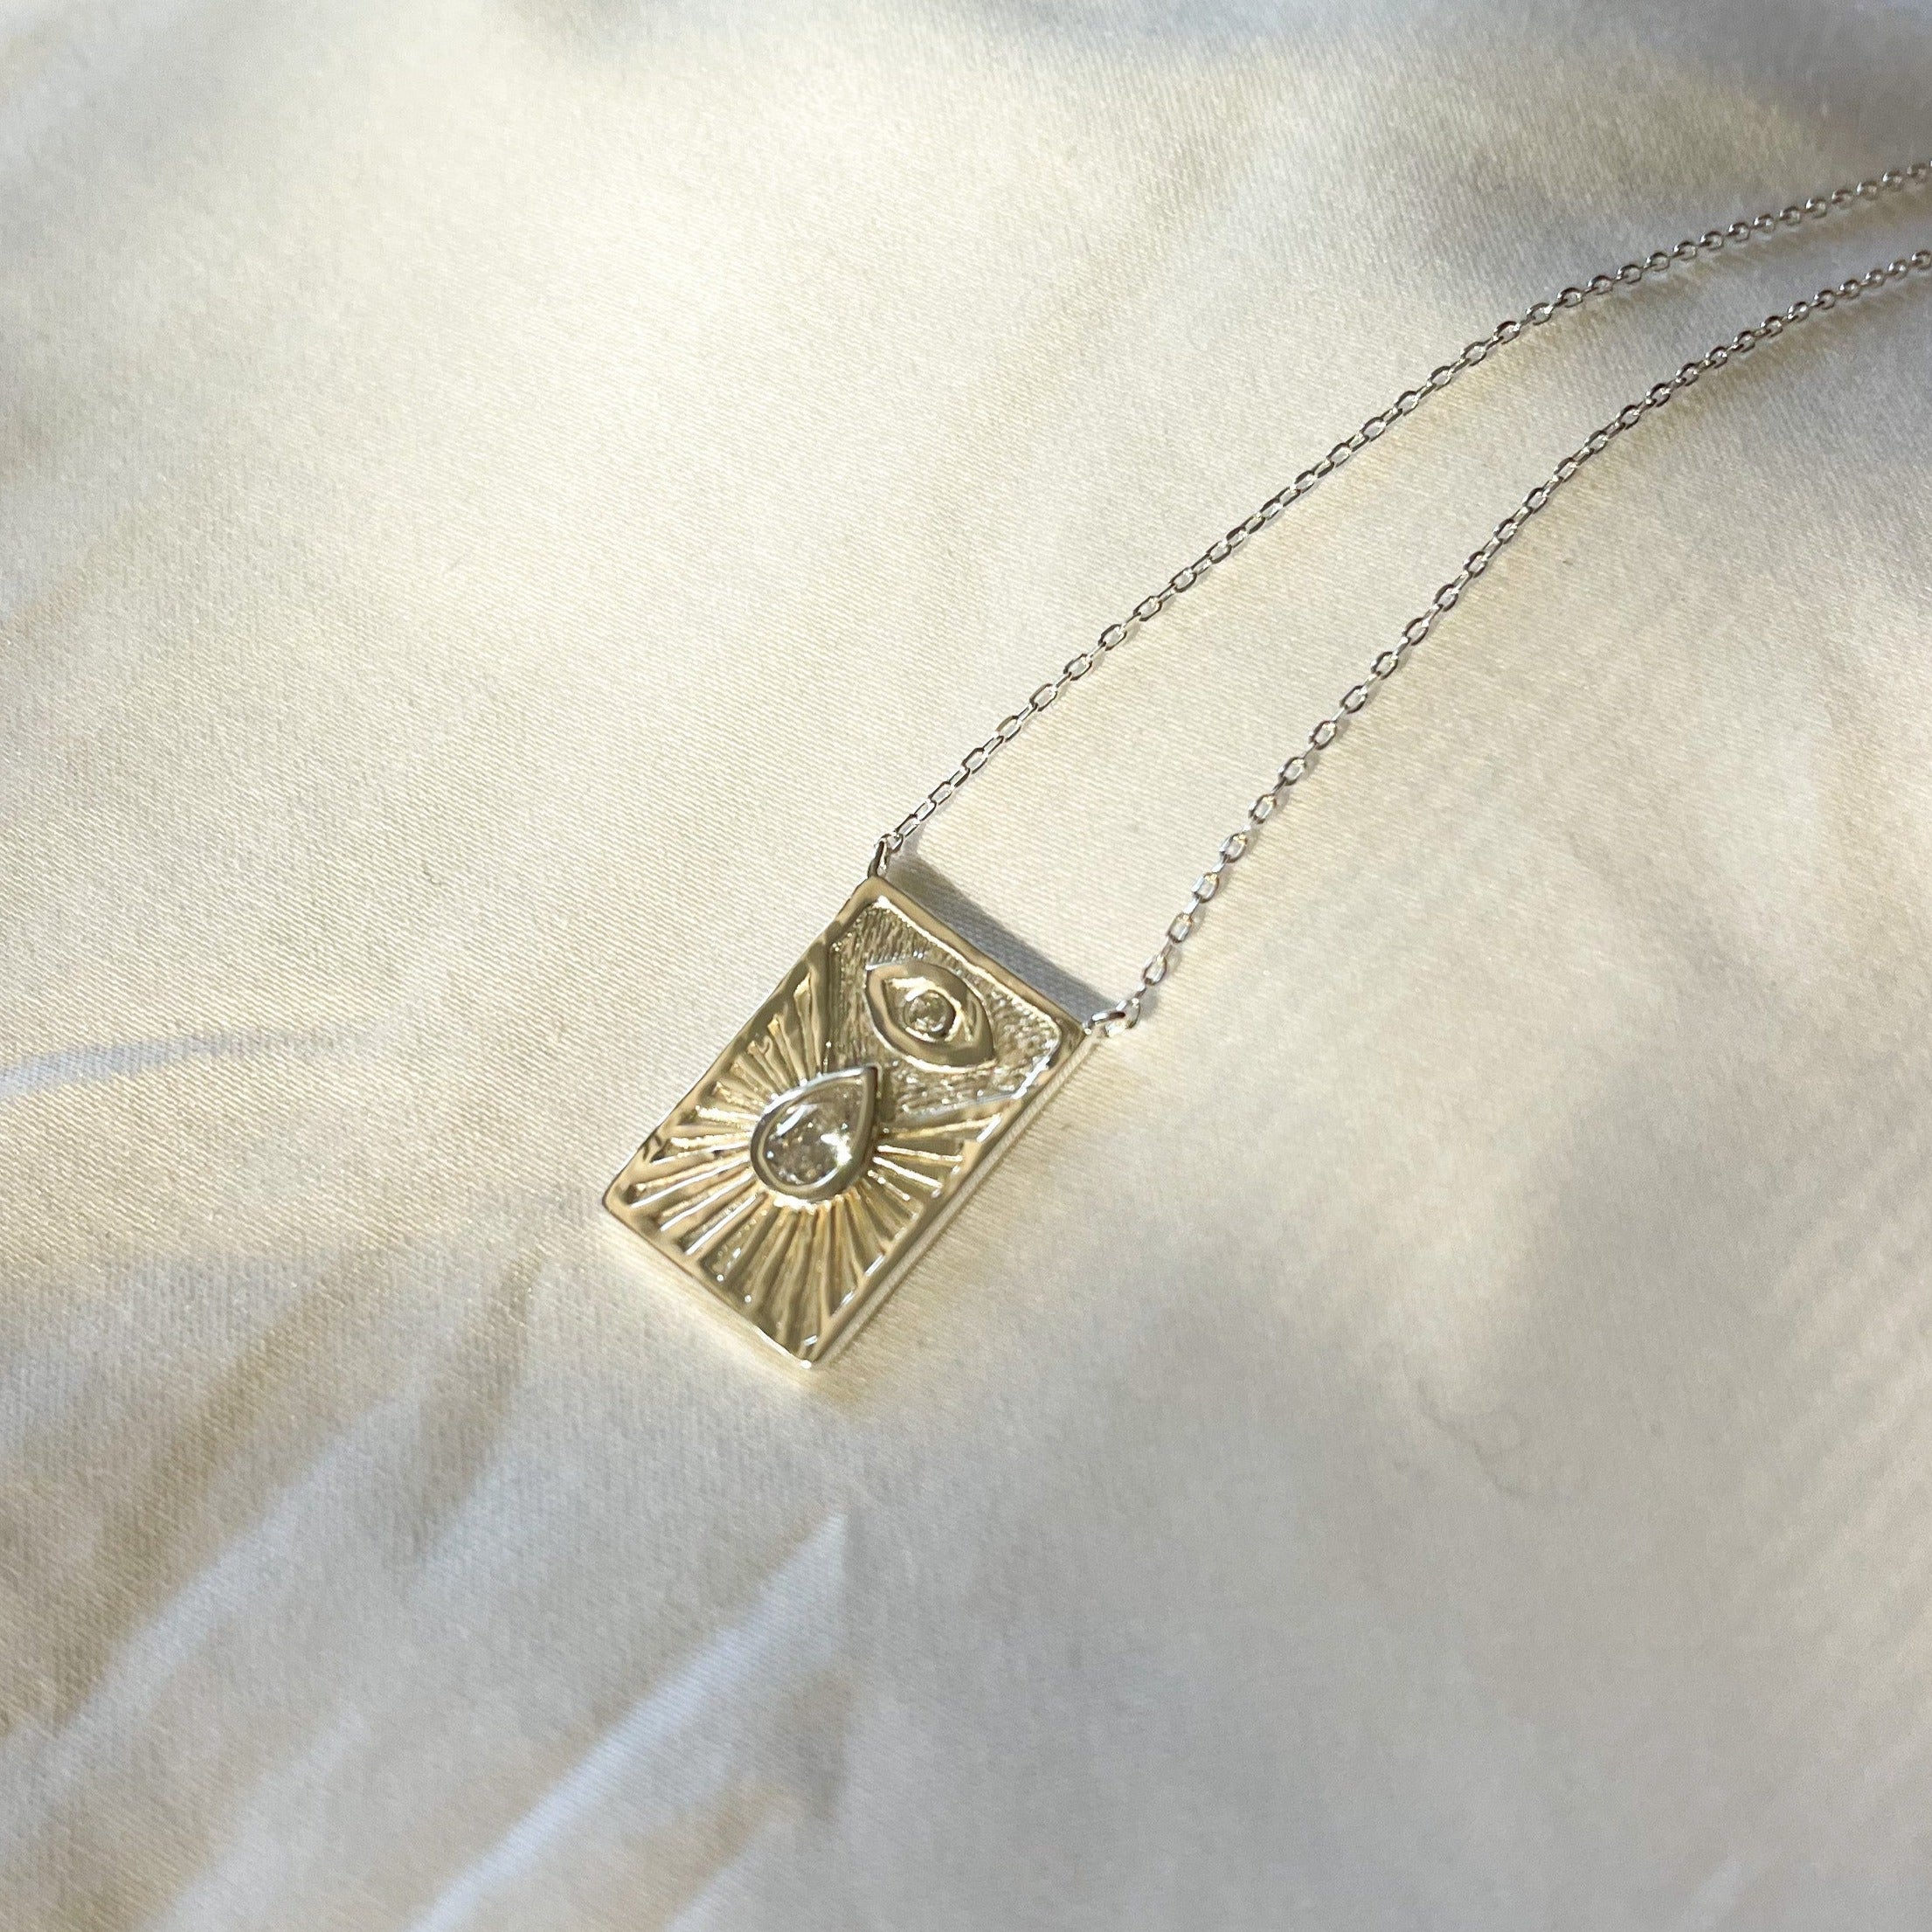 Aphrodite necklace in sterling silver